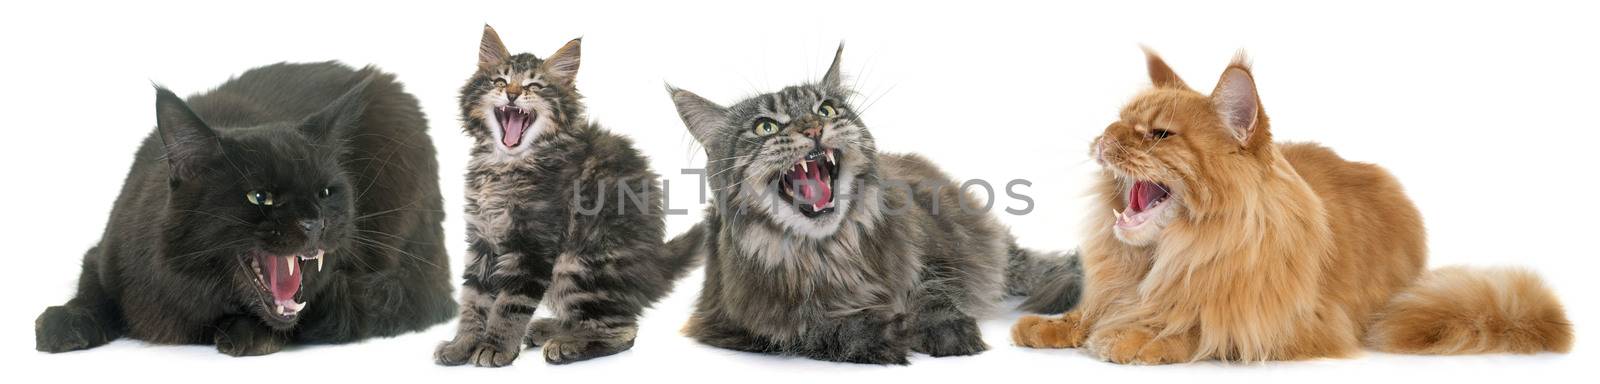 aggressive cats in front of white background